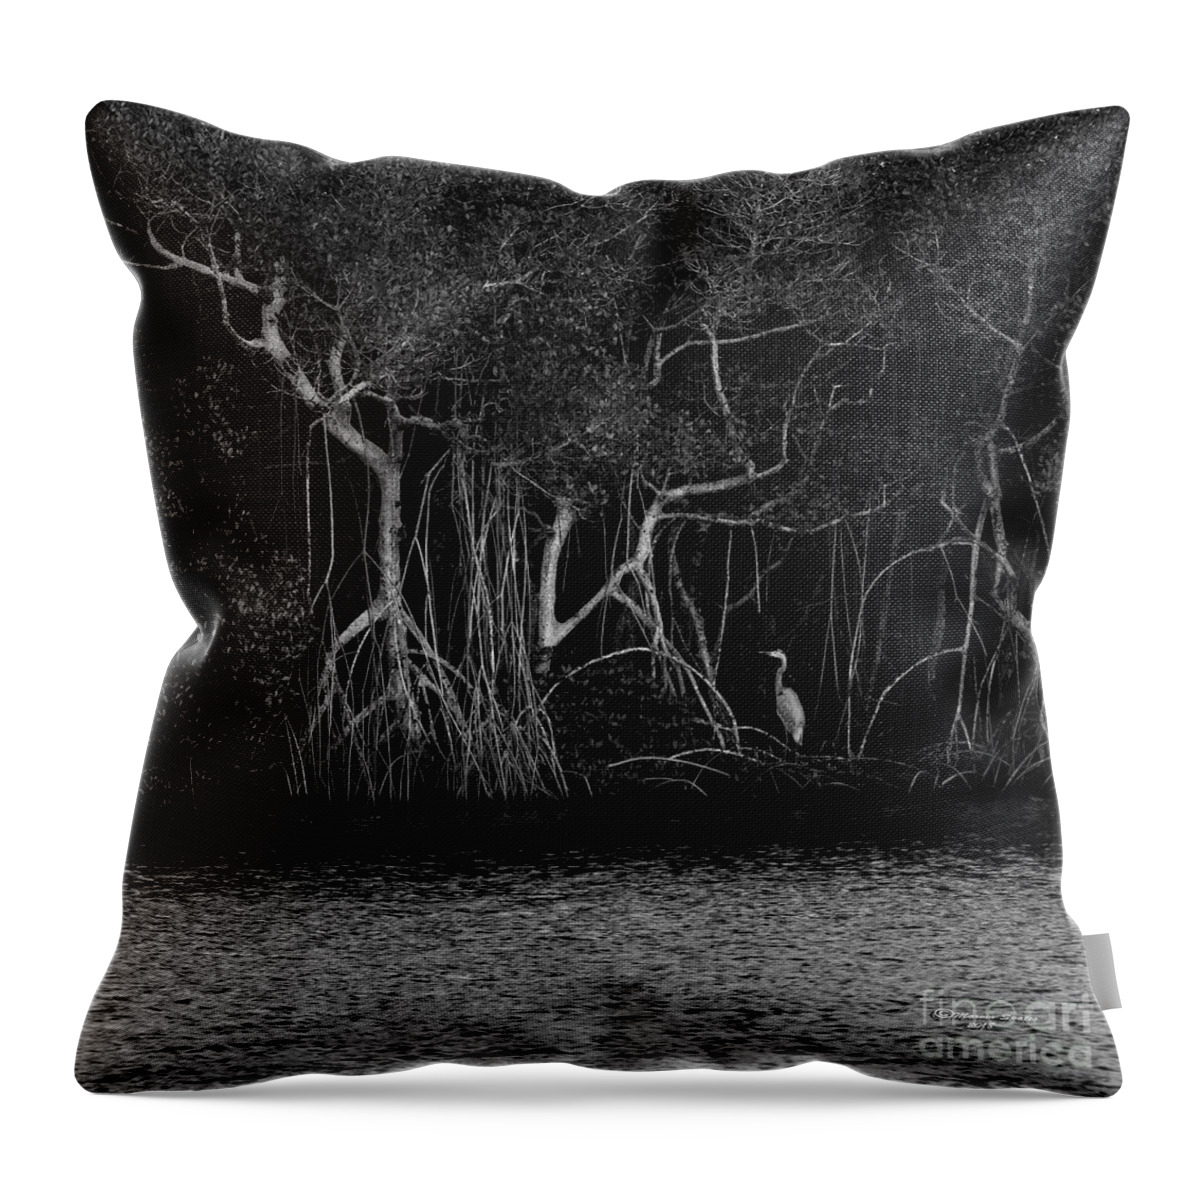 Nature Throw Pillow featuring the photograph Sanctuary by Marvin Spates